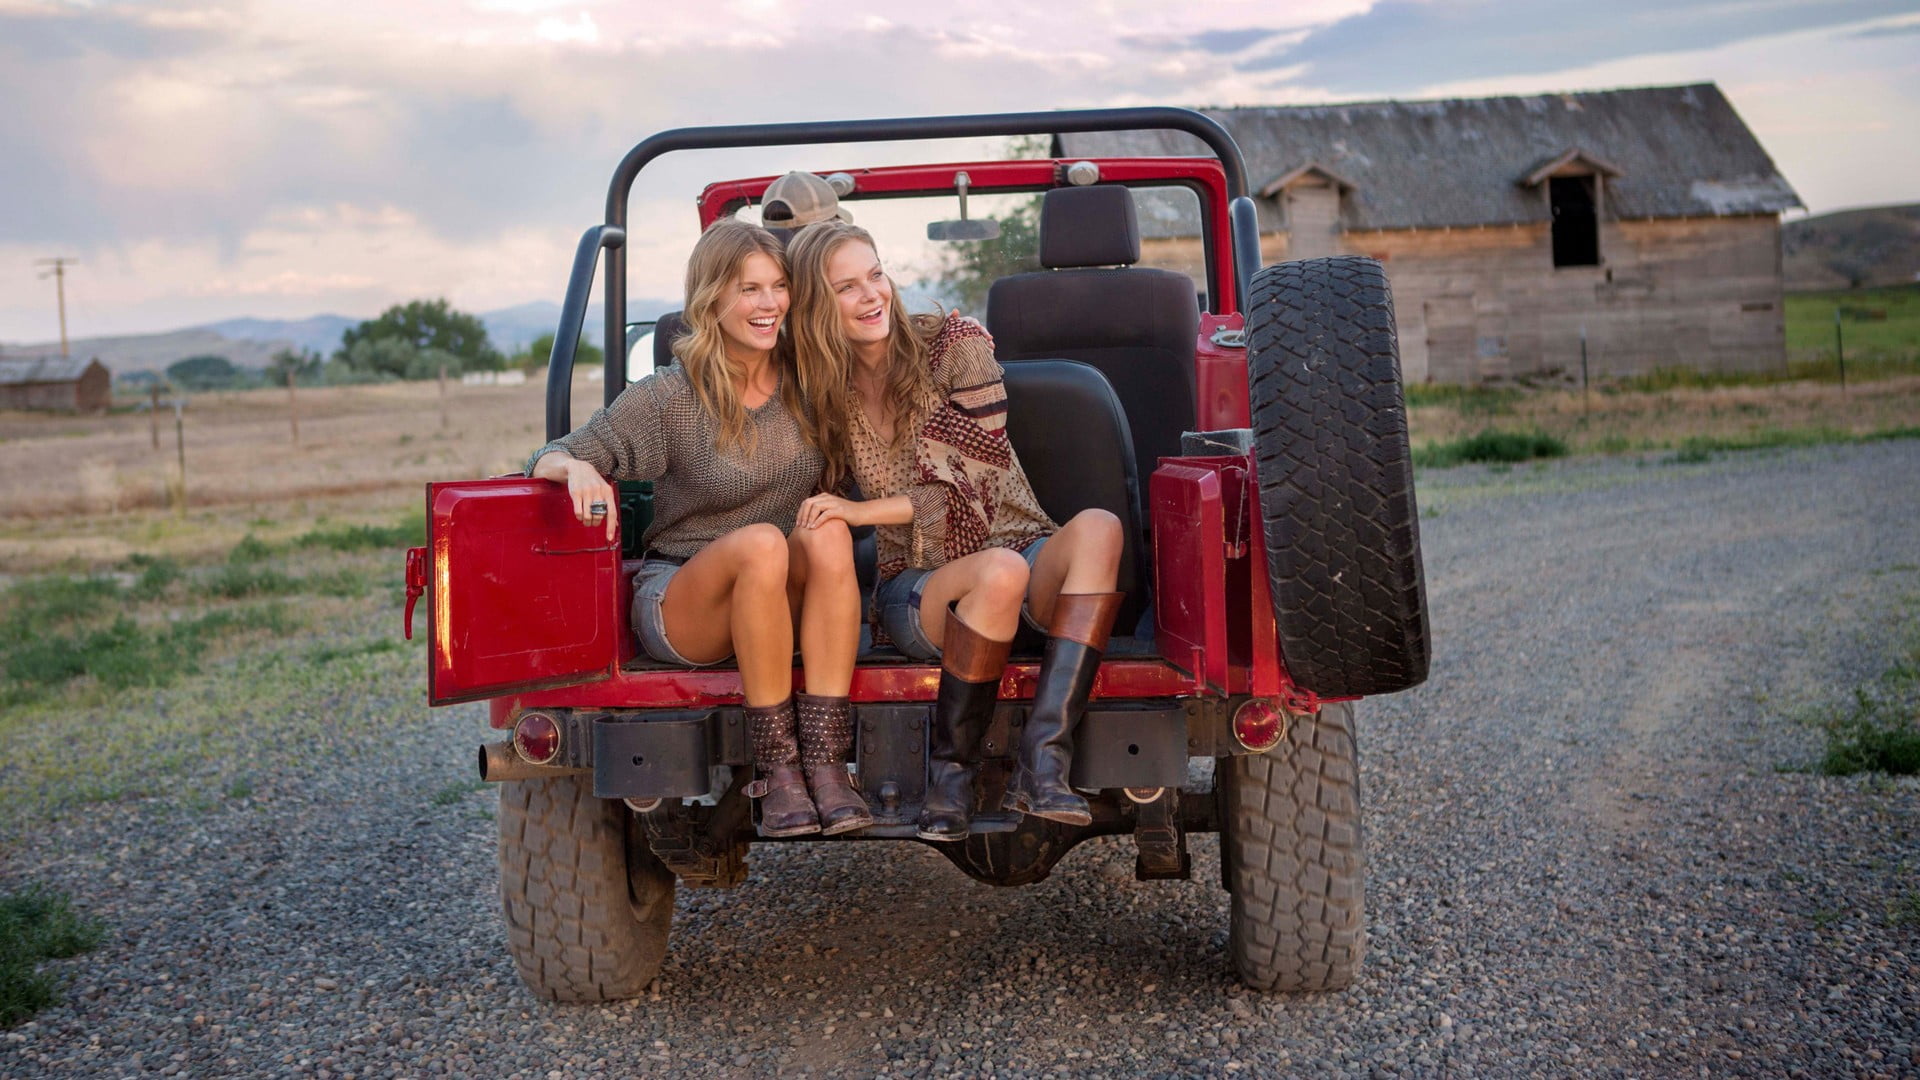 Two Women Riding On The Back Of Red Jeep Wrangler Hd Wallpaper Images, Photos, Reviews